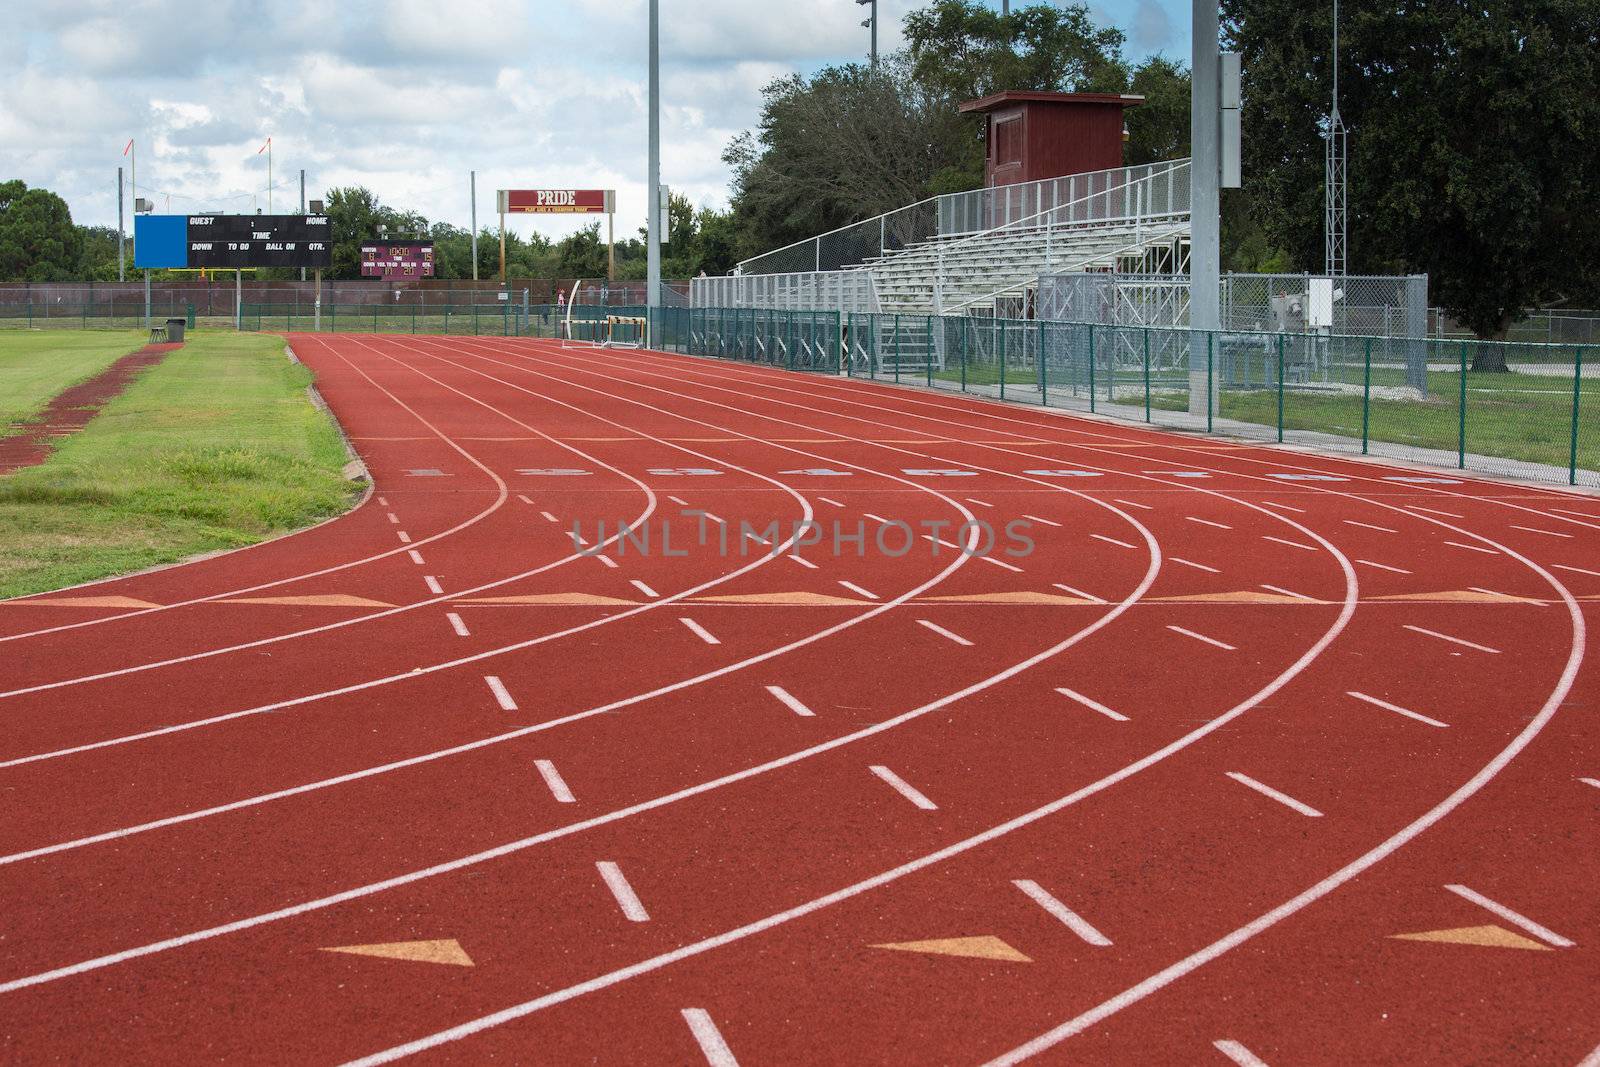 This track and field facility is a symbol of the importance of sports and athletics as an instrument in preparing students for the future.